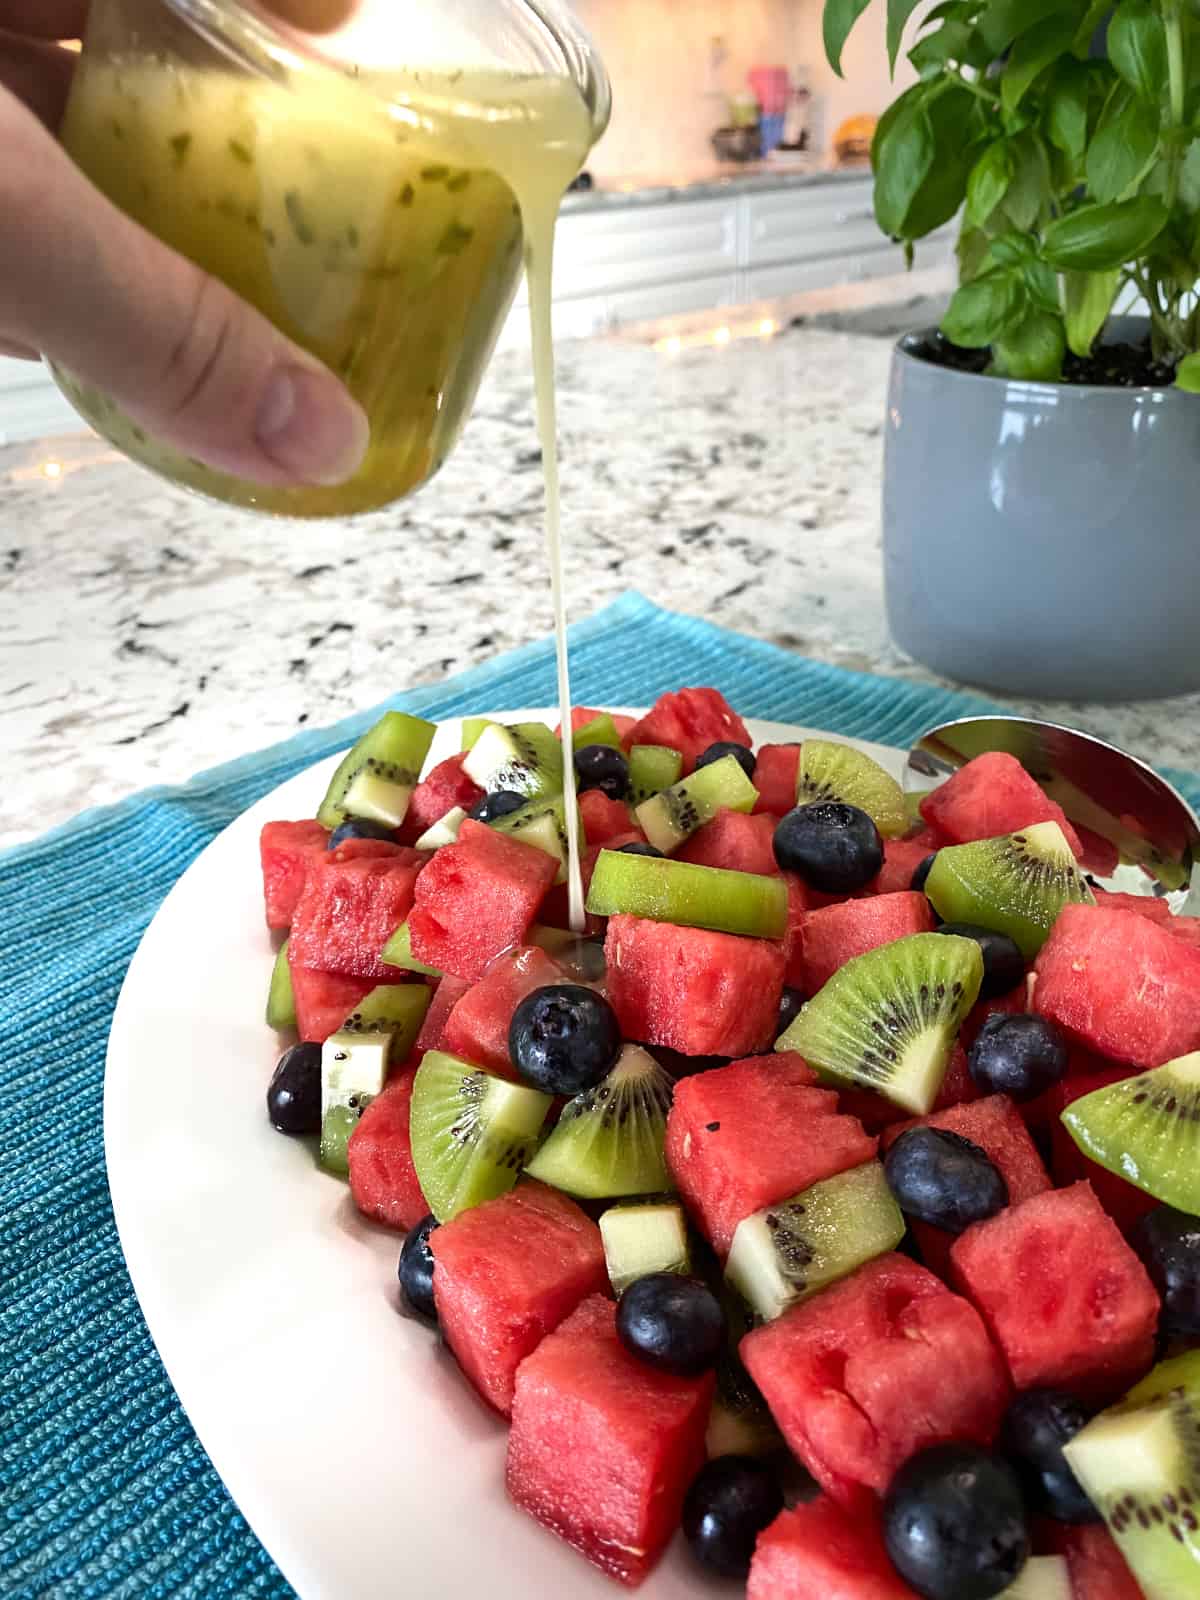 Pale green dressing is being poured over bright red watermelon, kiwis, and blueberries.